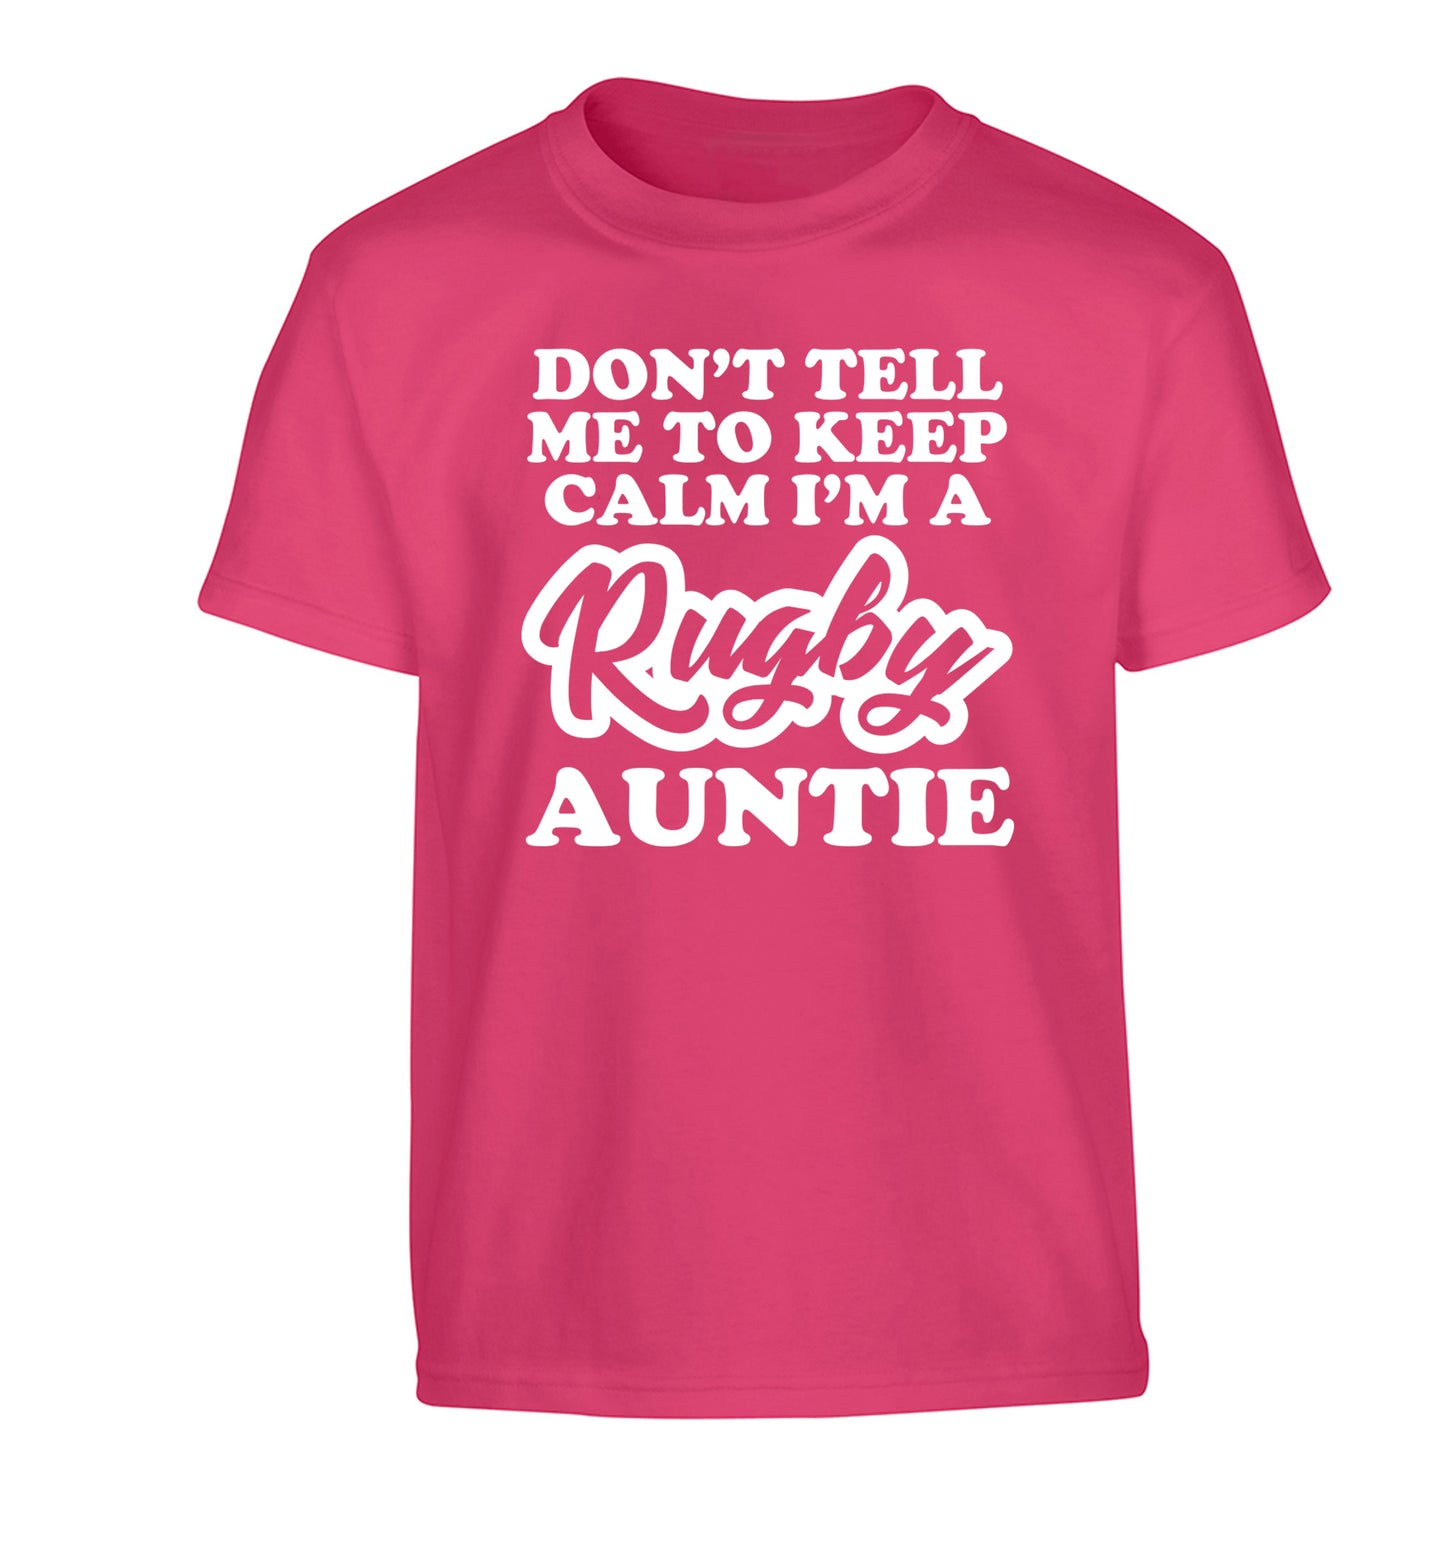 Don't tell me keep calm I'm a rugby auntie Children's pink Tshirt 12-13 Years